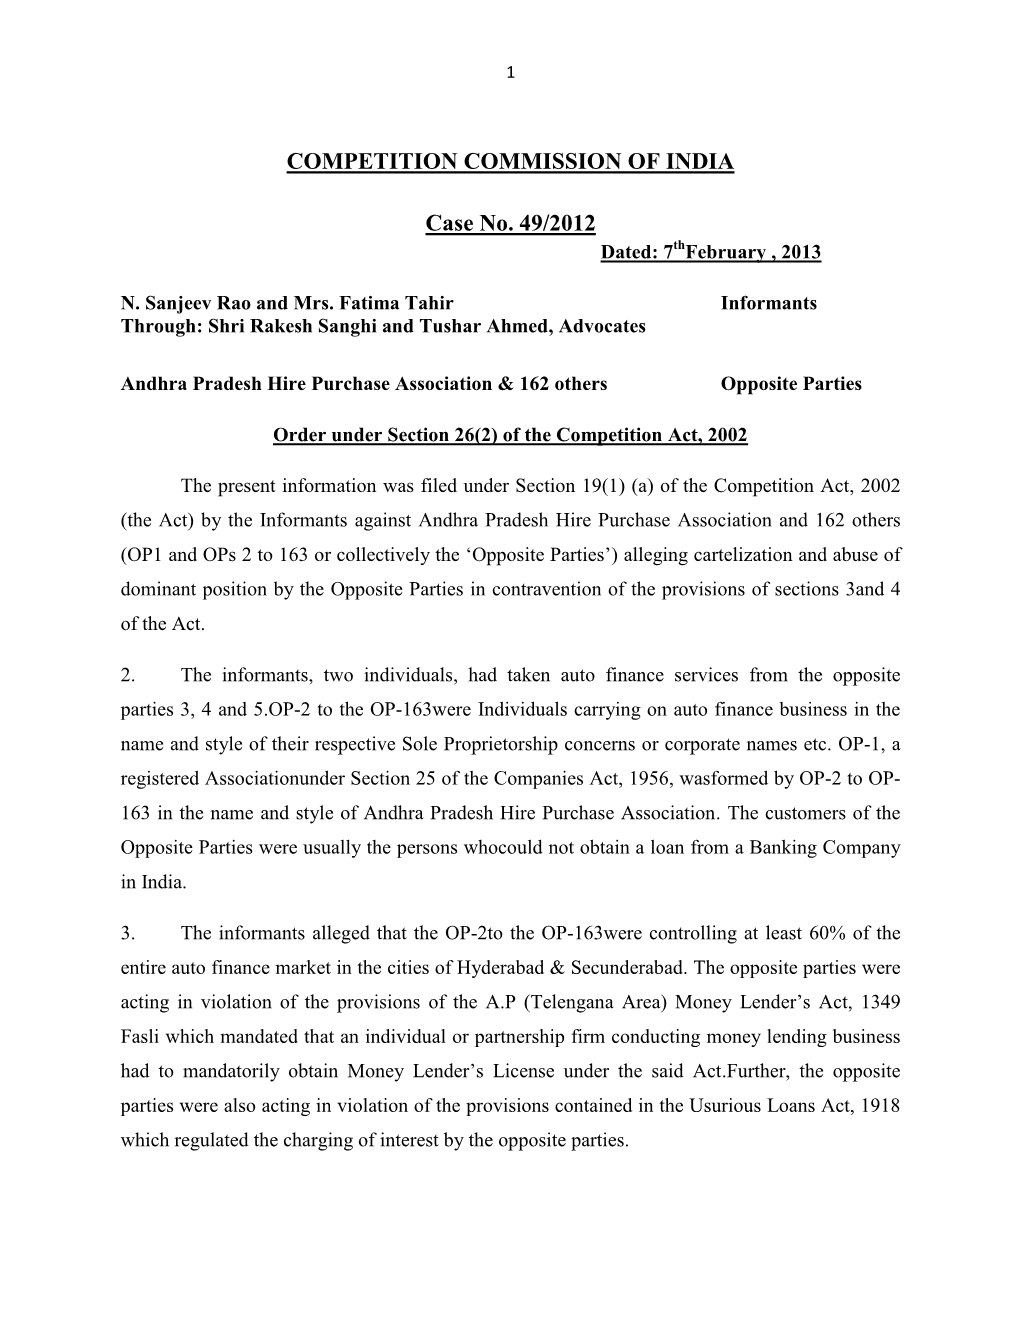 COMPETITION COMMISSION of INDIA Case No. 49/2012